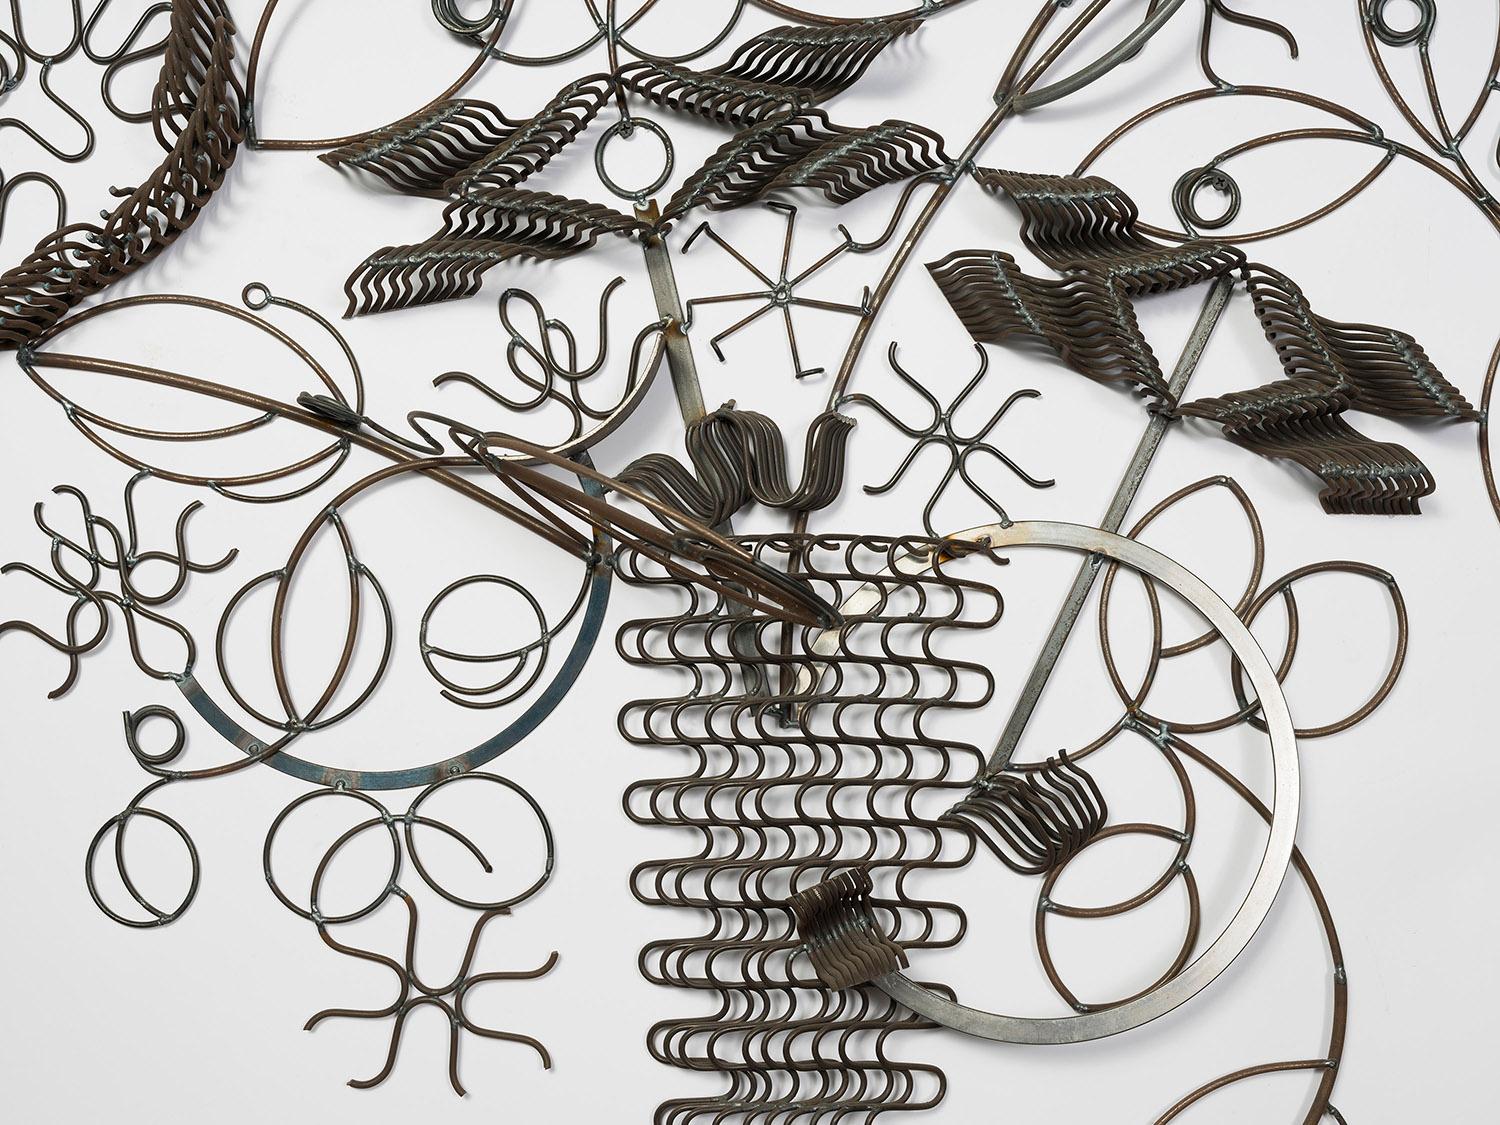 Welded spring and mild steel by
Aswoon/SusanWoods. 

Photo by Kris Graves Photography.